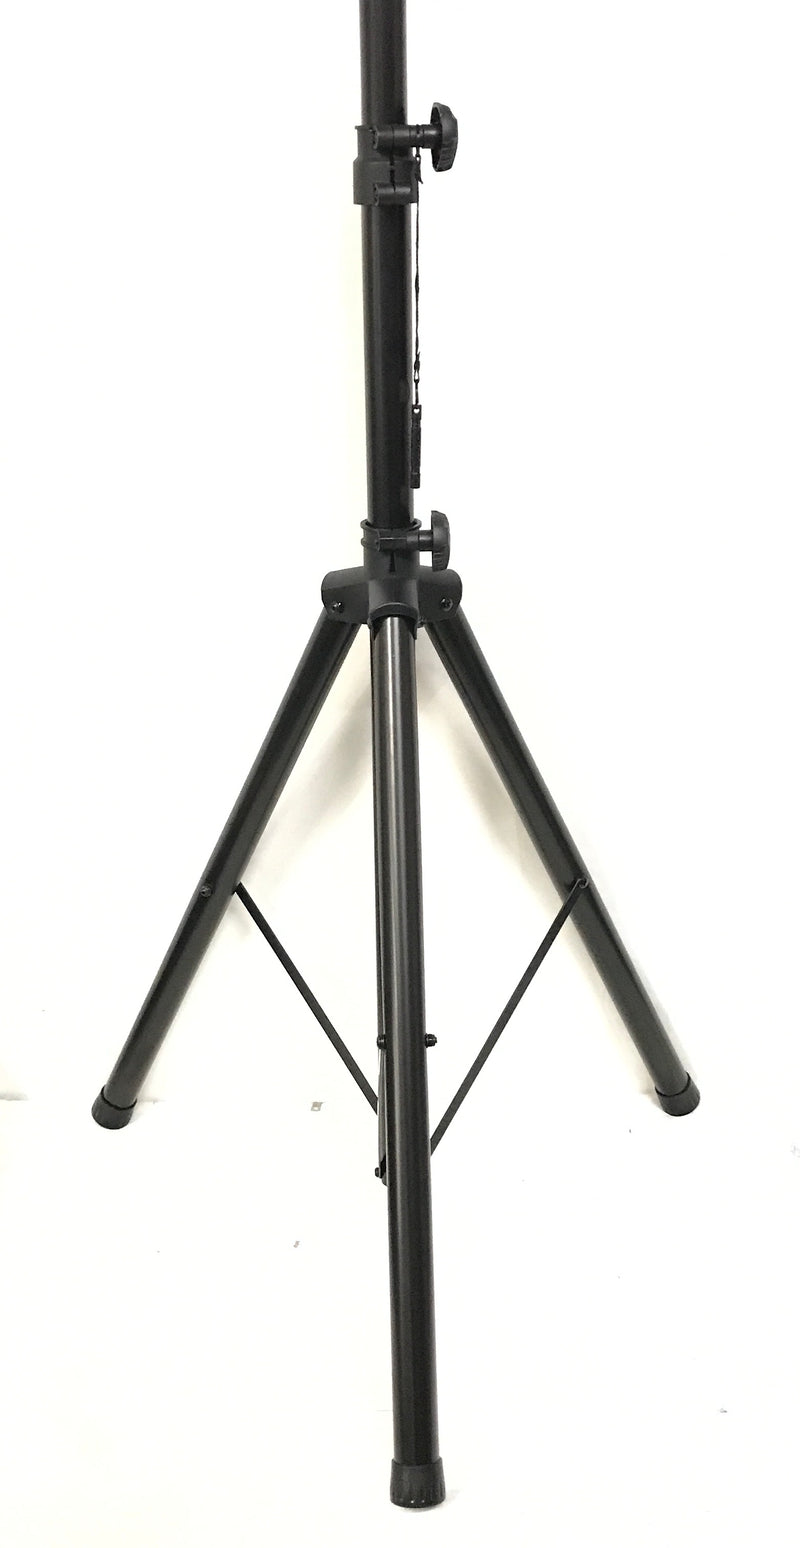 ADJ American DJ Heavy Duty Speaker Stand When Bought in Pairs comes w/ Free Carry Bag - NEW